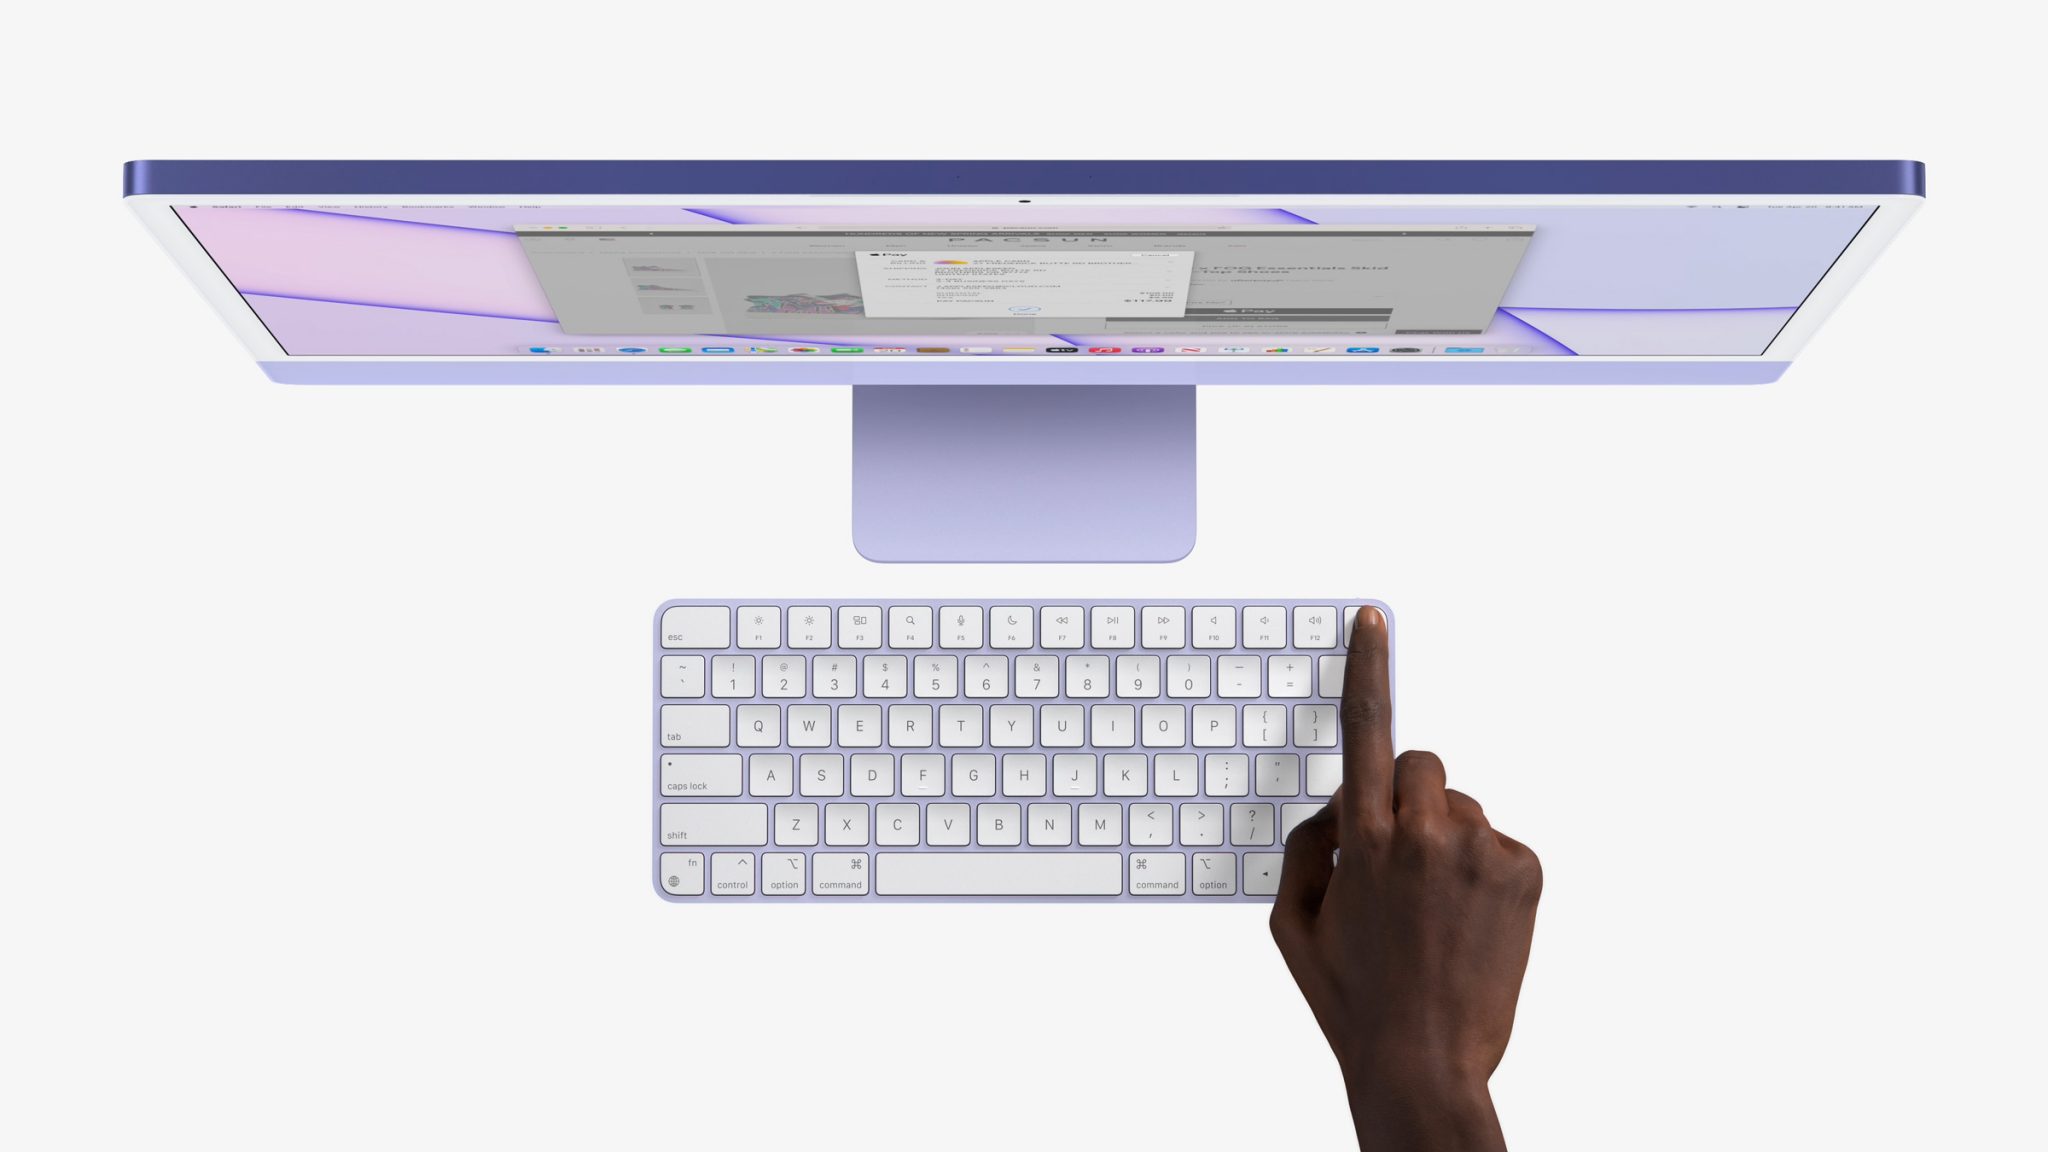 apple_new-imac-spring21_pt-purple-touch-id_04202021-scaled